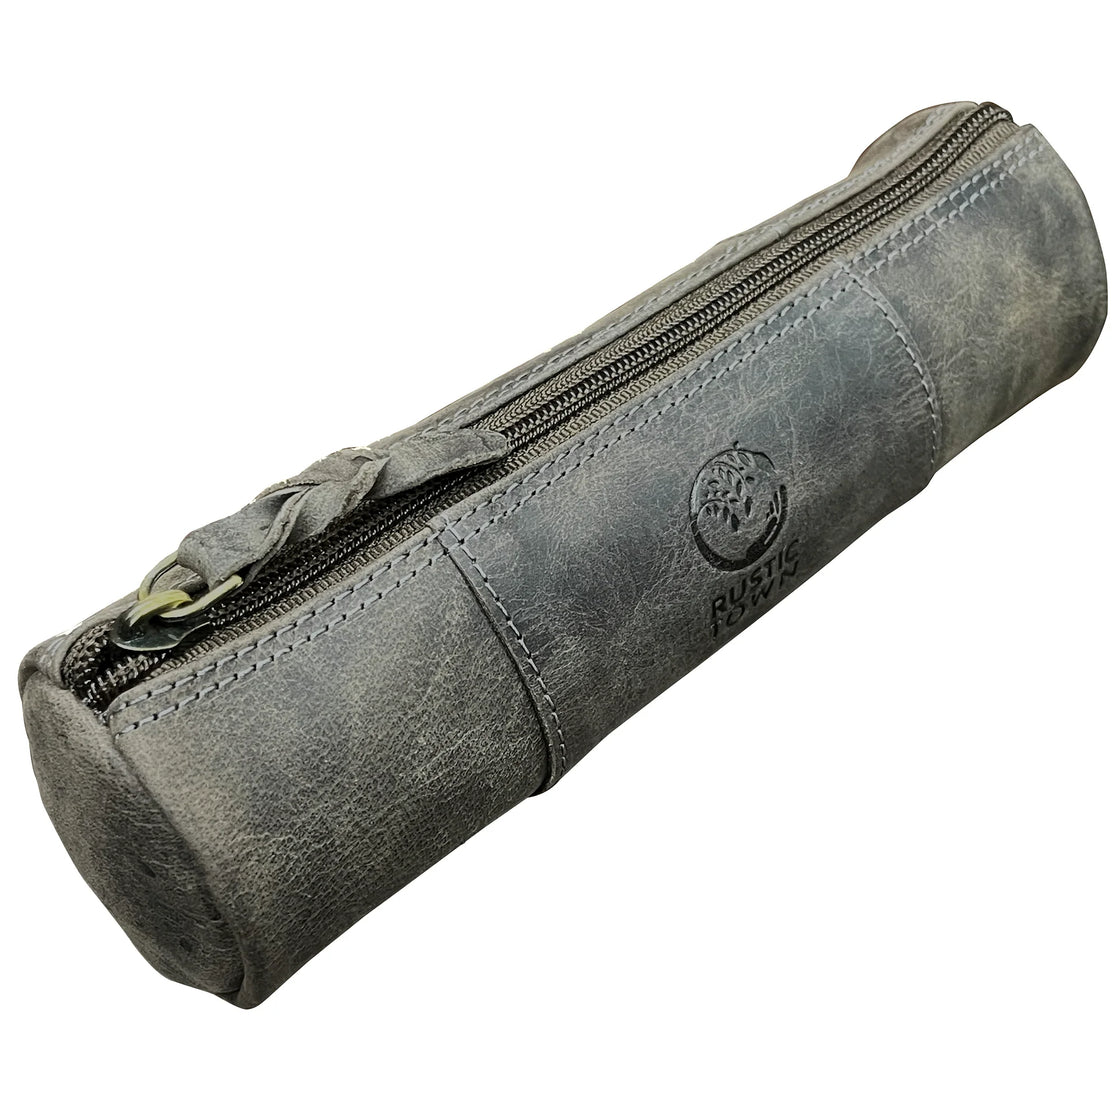 Tom Leather Pencil Case - Zippered Pen Pouch for School, Work